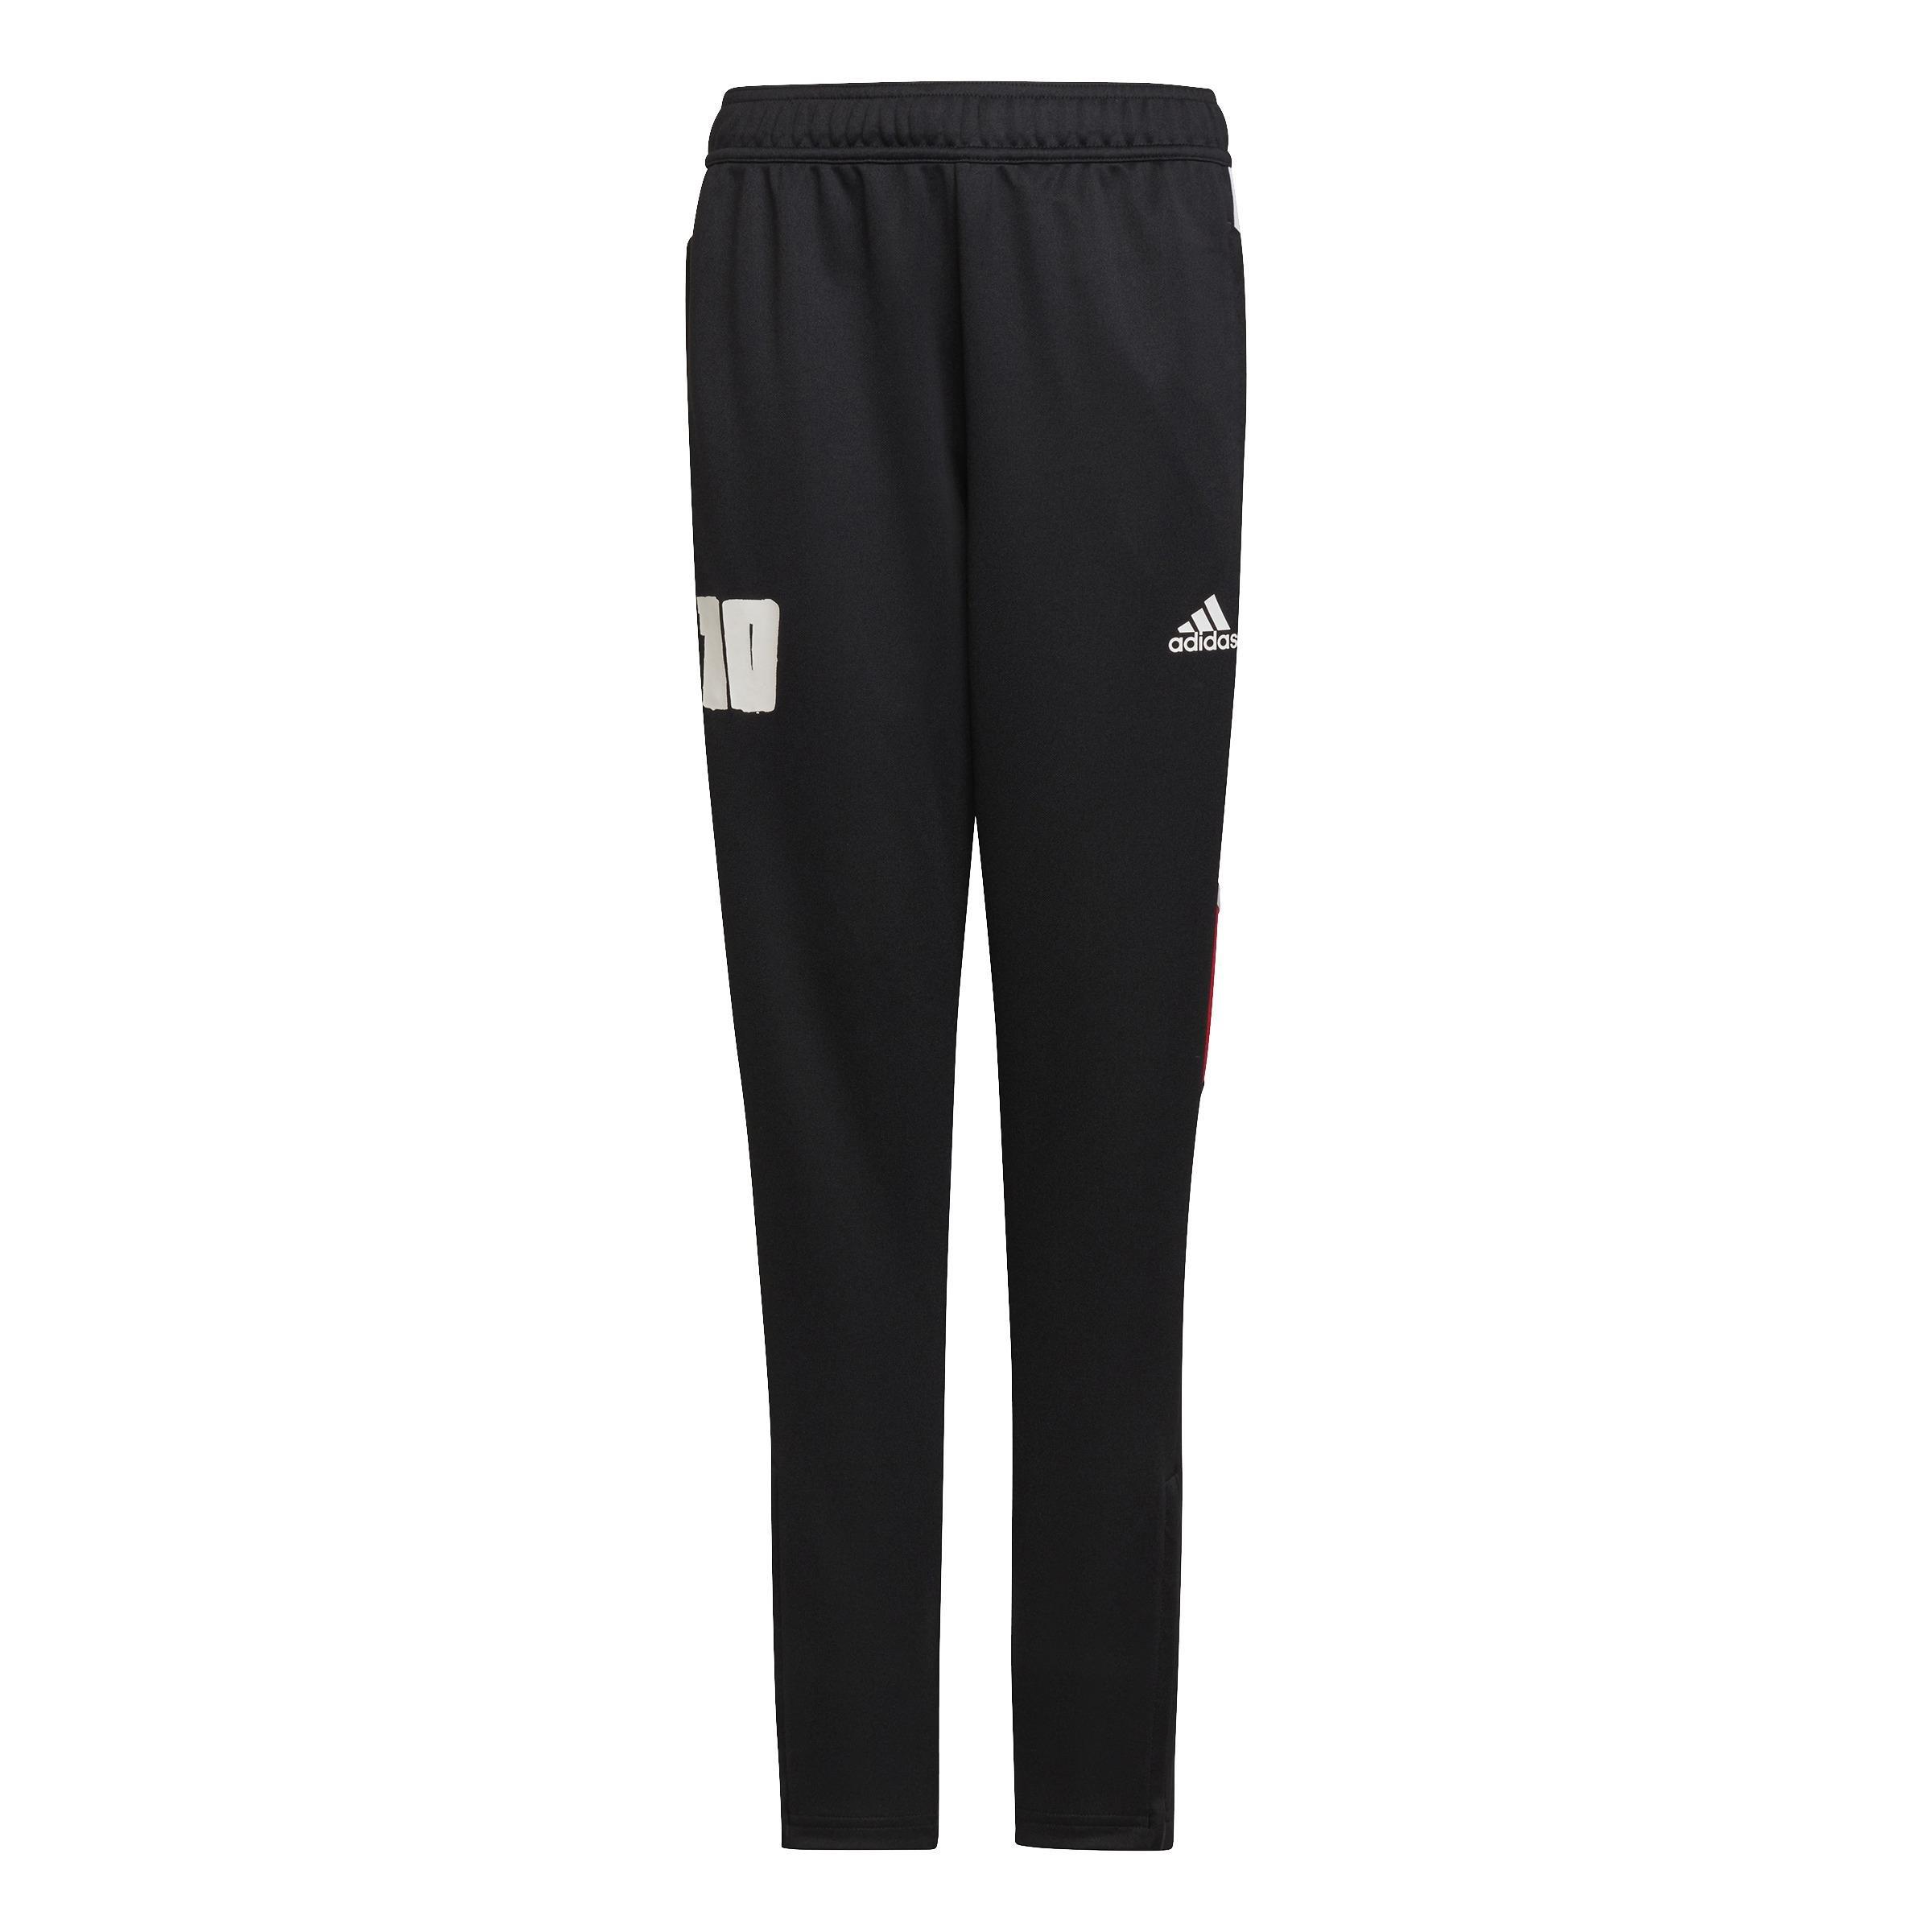 Boys' Messi Tracksuit Pant from adidas